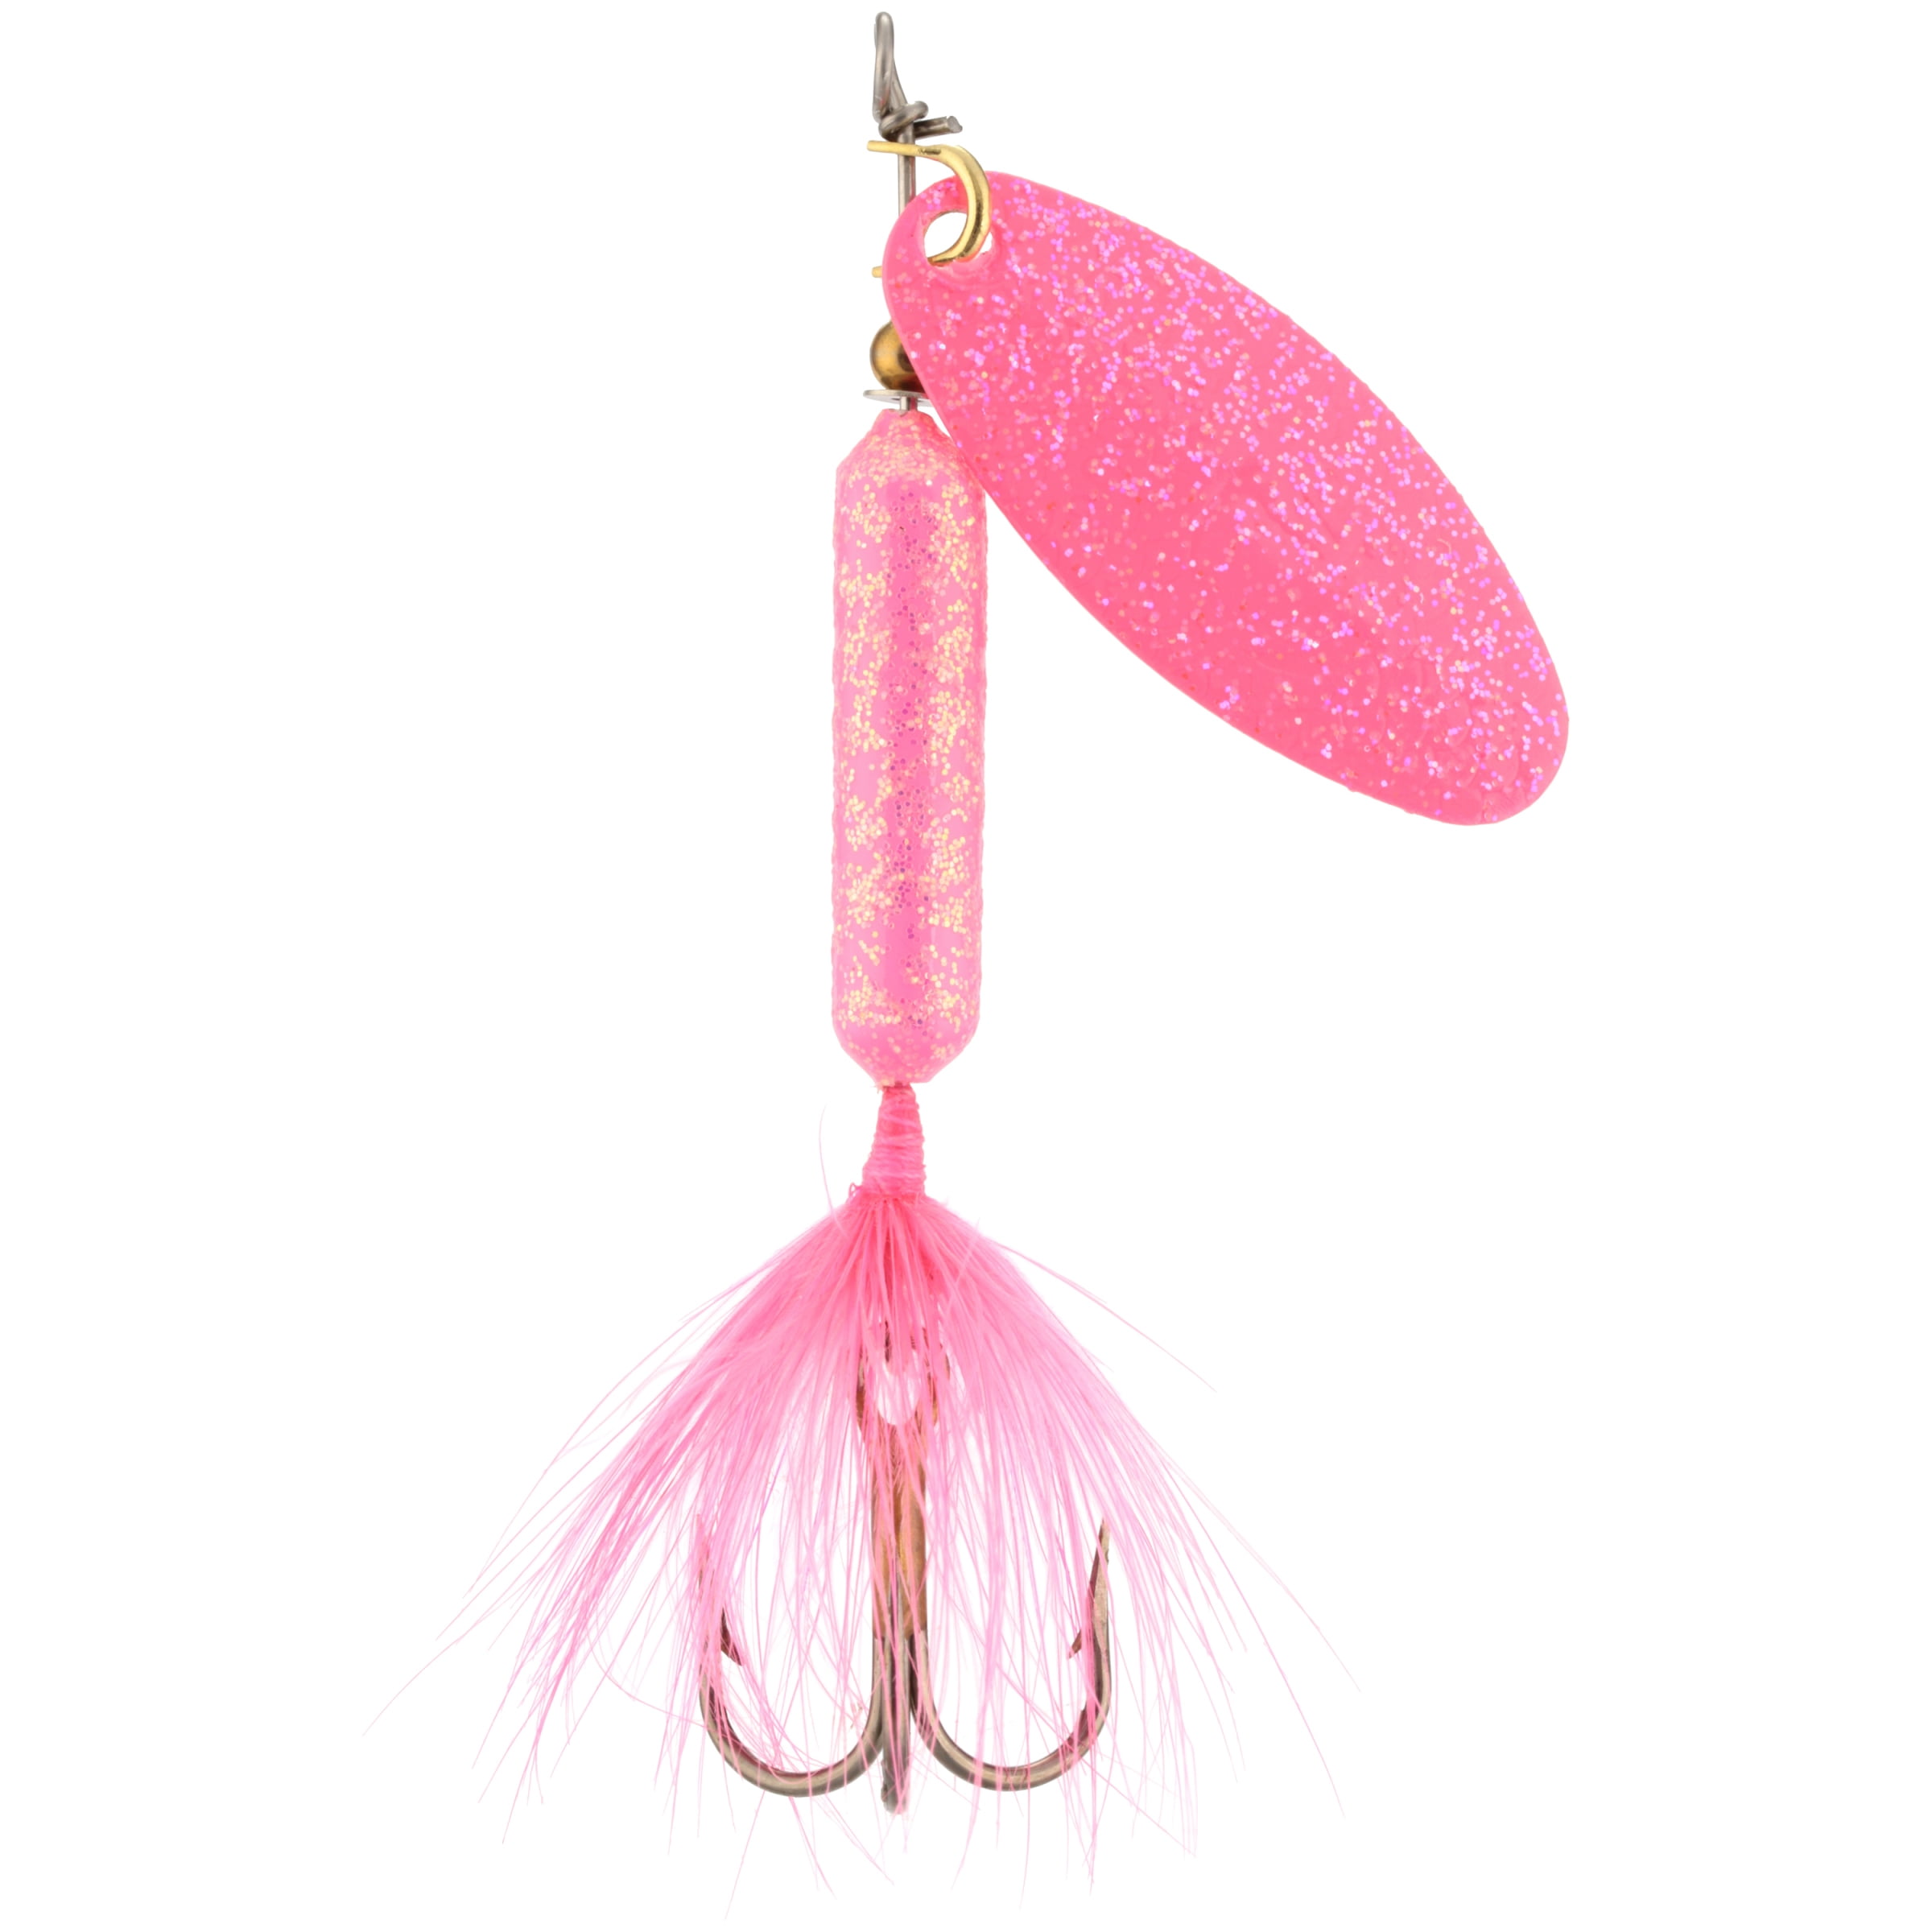 Worden's® Rooster Tail® Original, Inline Spinnerbait Fishing Lure, Glitter  Pink, 1/4 oz. Carded Pack